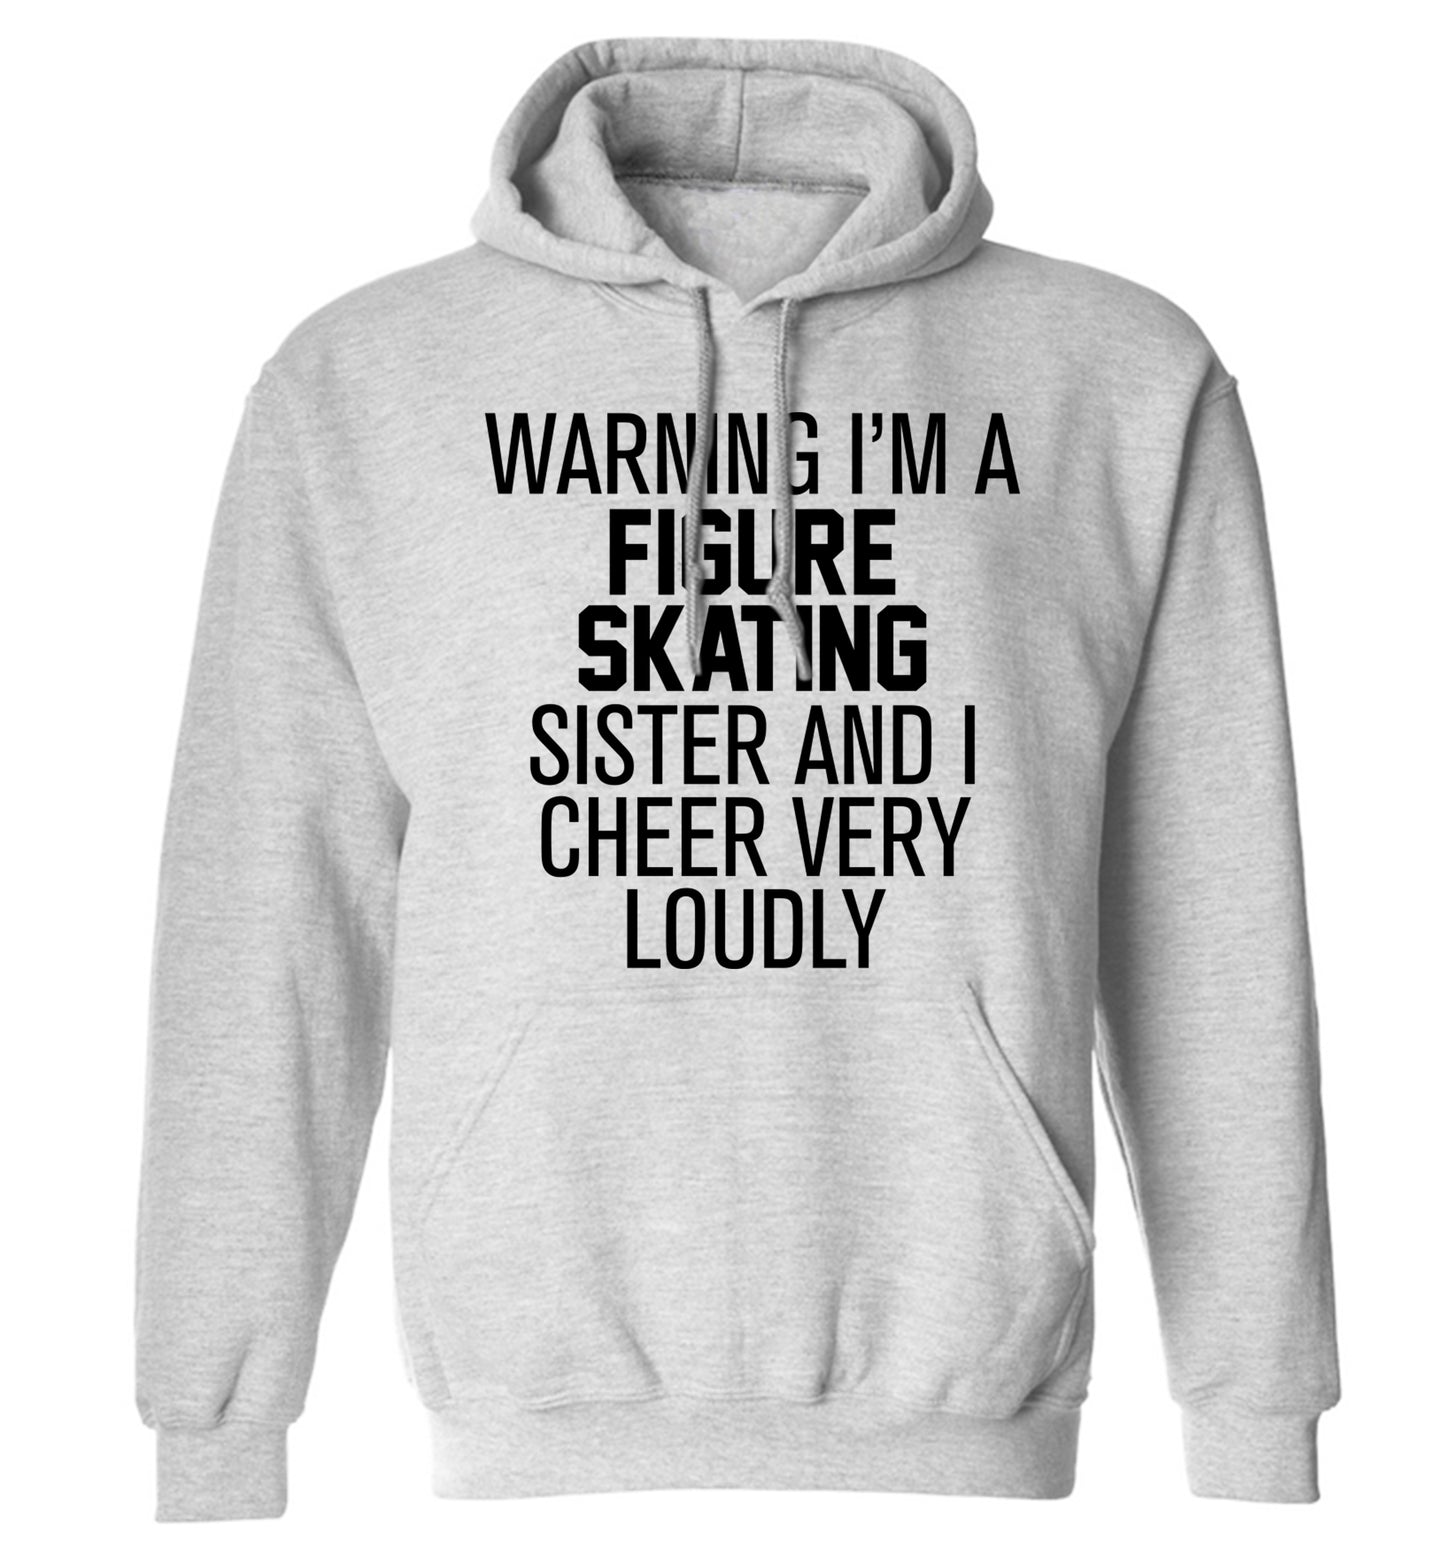 Warning I'm a figure skating sister and I cheer very loudly adults unisexgrey hoodie 2XL